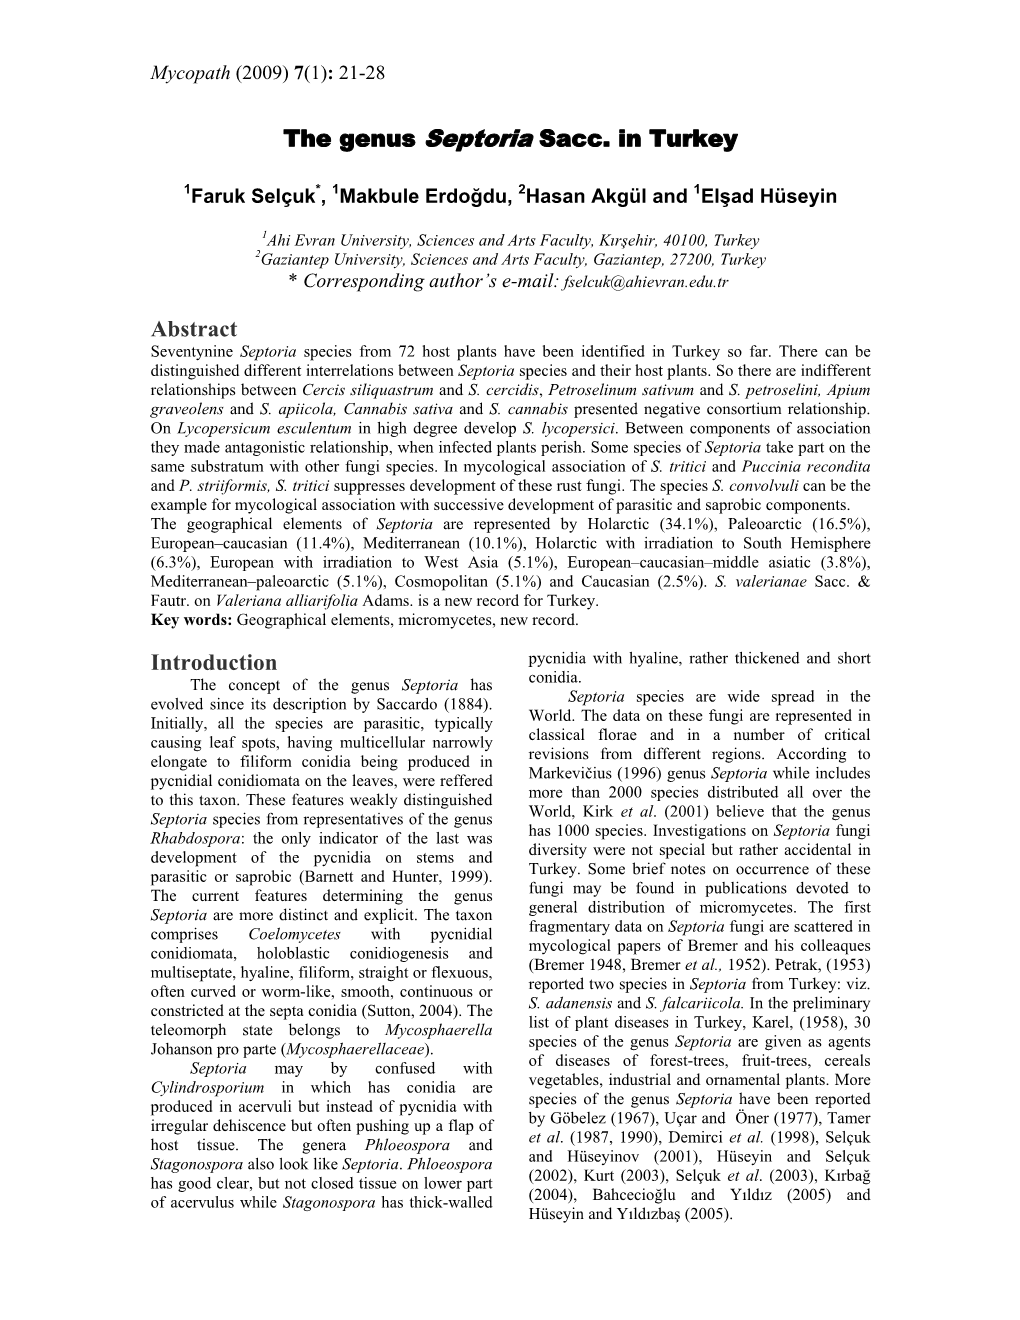 The Genus Septoria Sacc. in Turkey Abstract Introduction